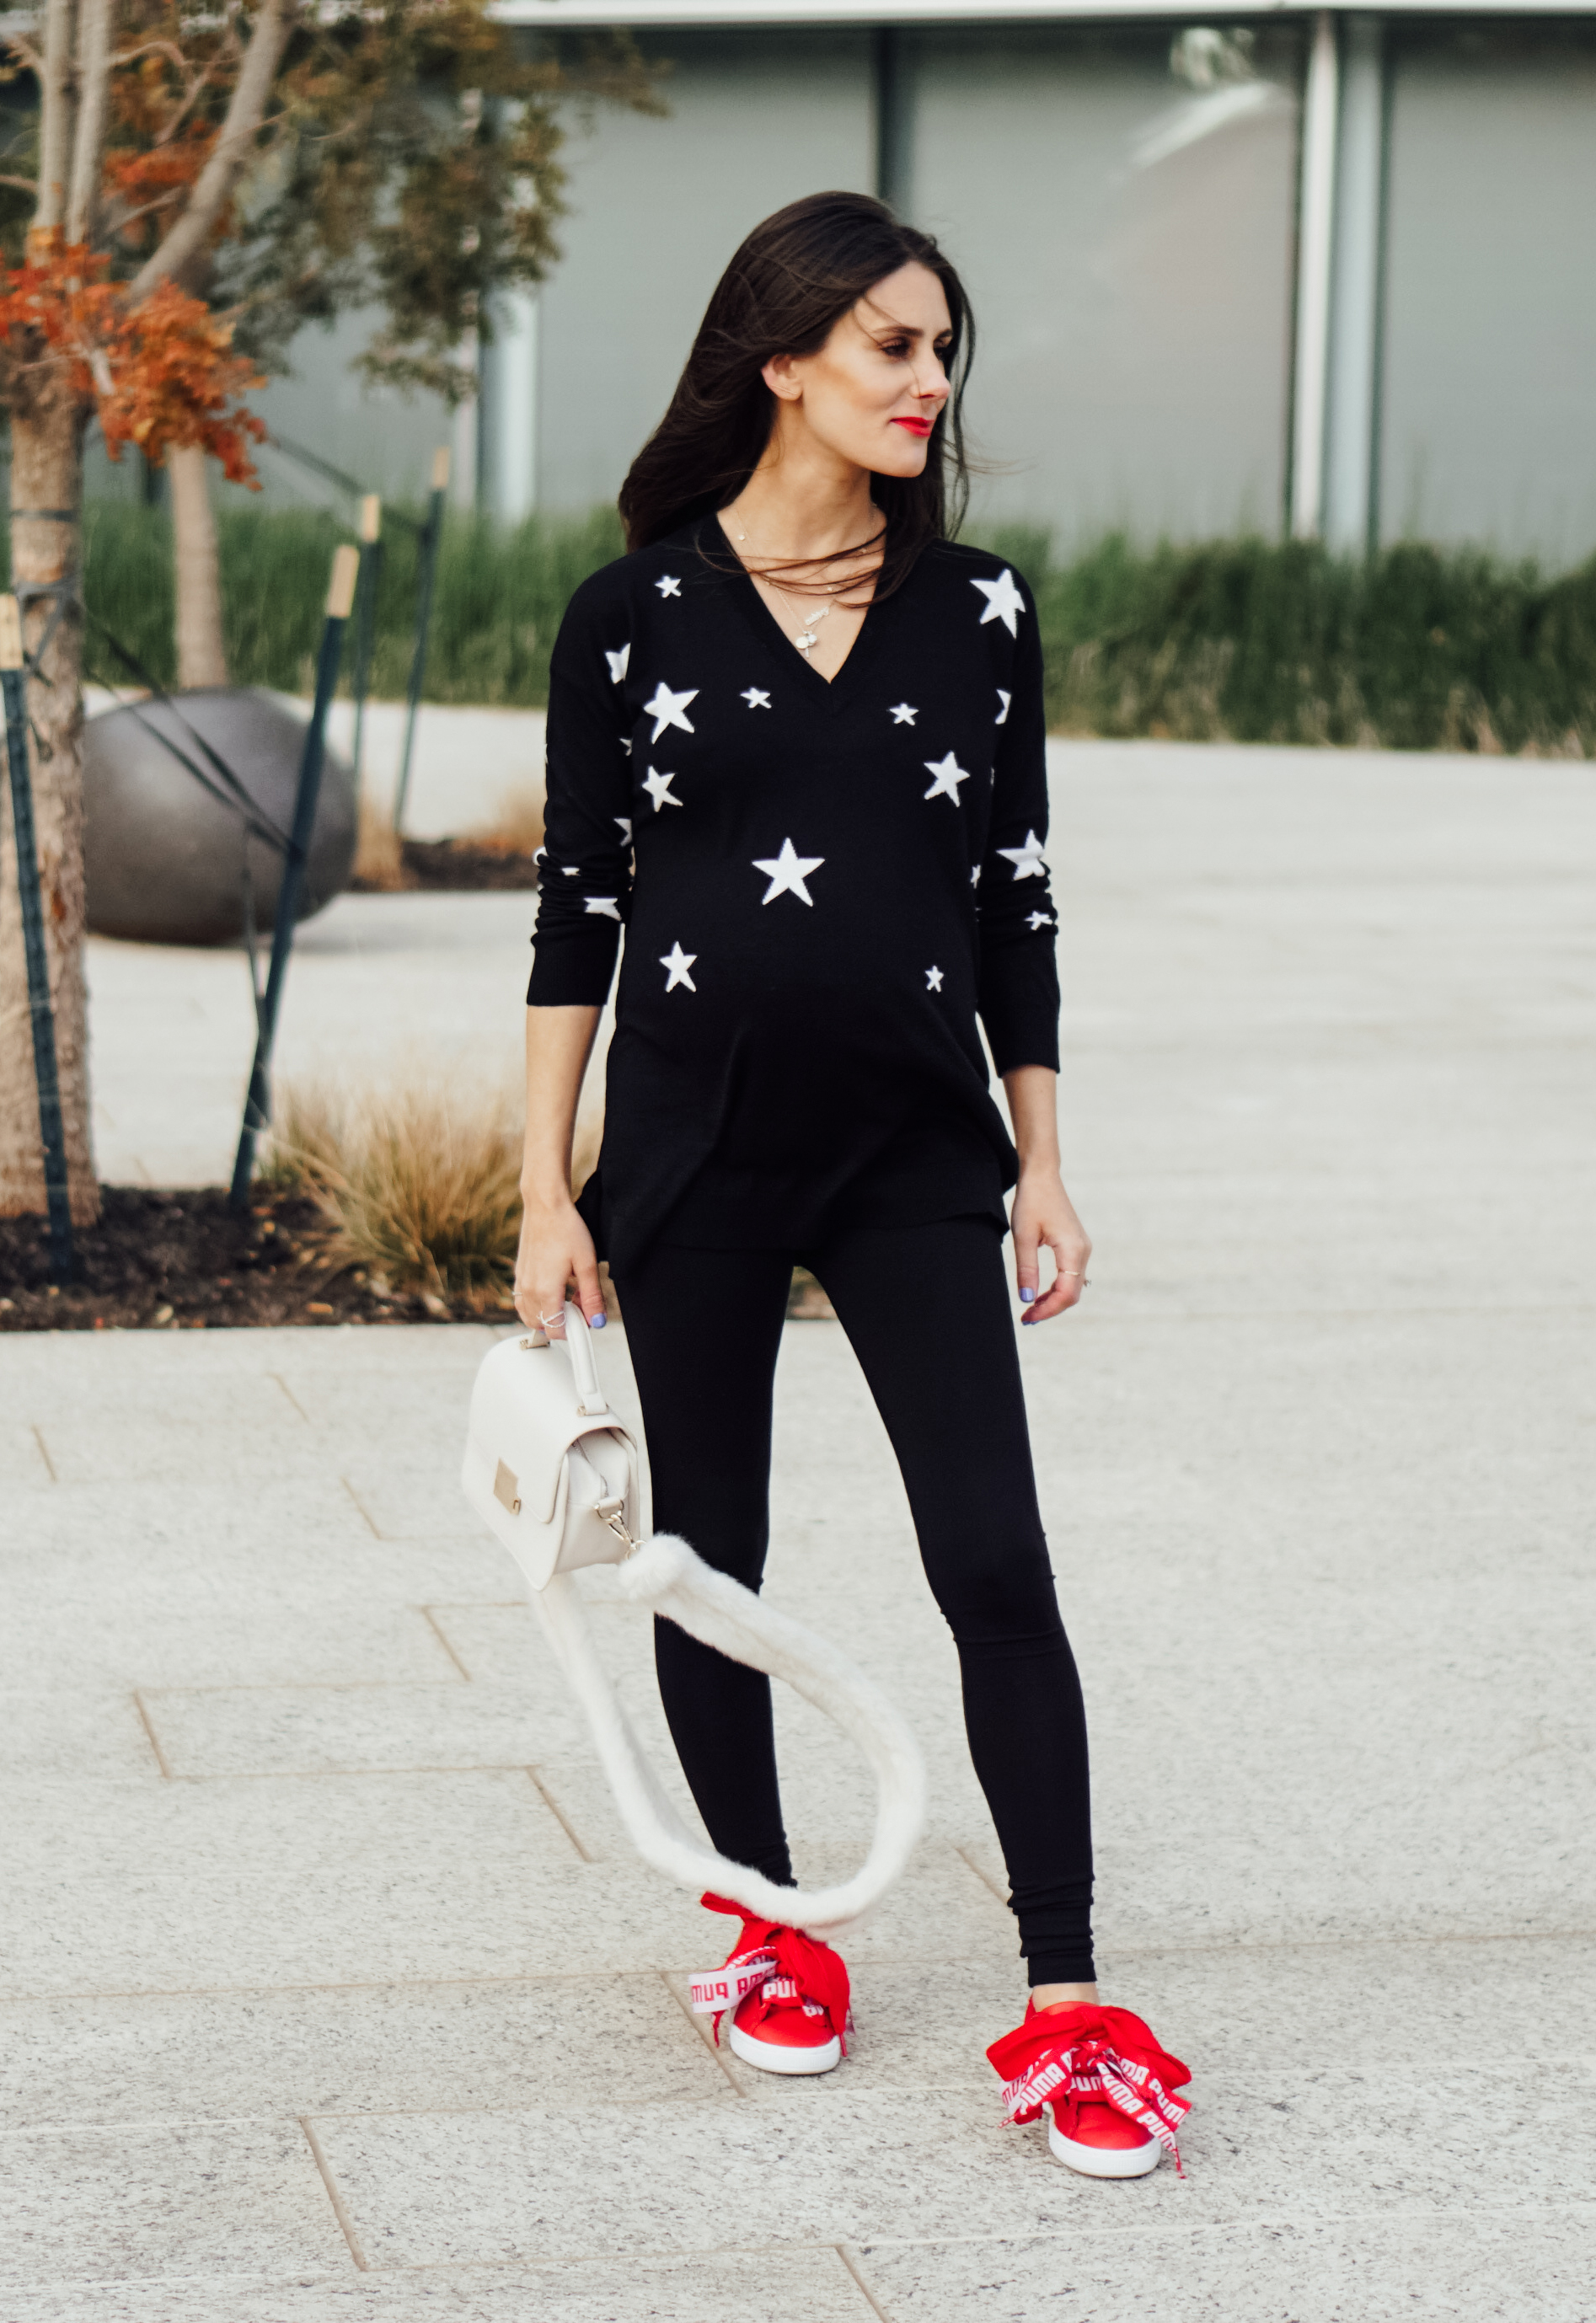 I'm on thedandyliar.com, styling this star intarsia knit sweater and black leggings from Isabella Oliver in my third trimester! The best part? They can be worn after pregnancy, which for me is in less than a week!